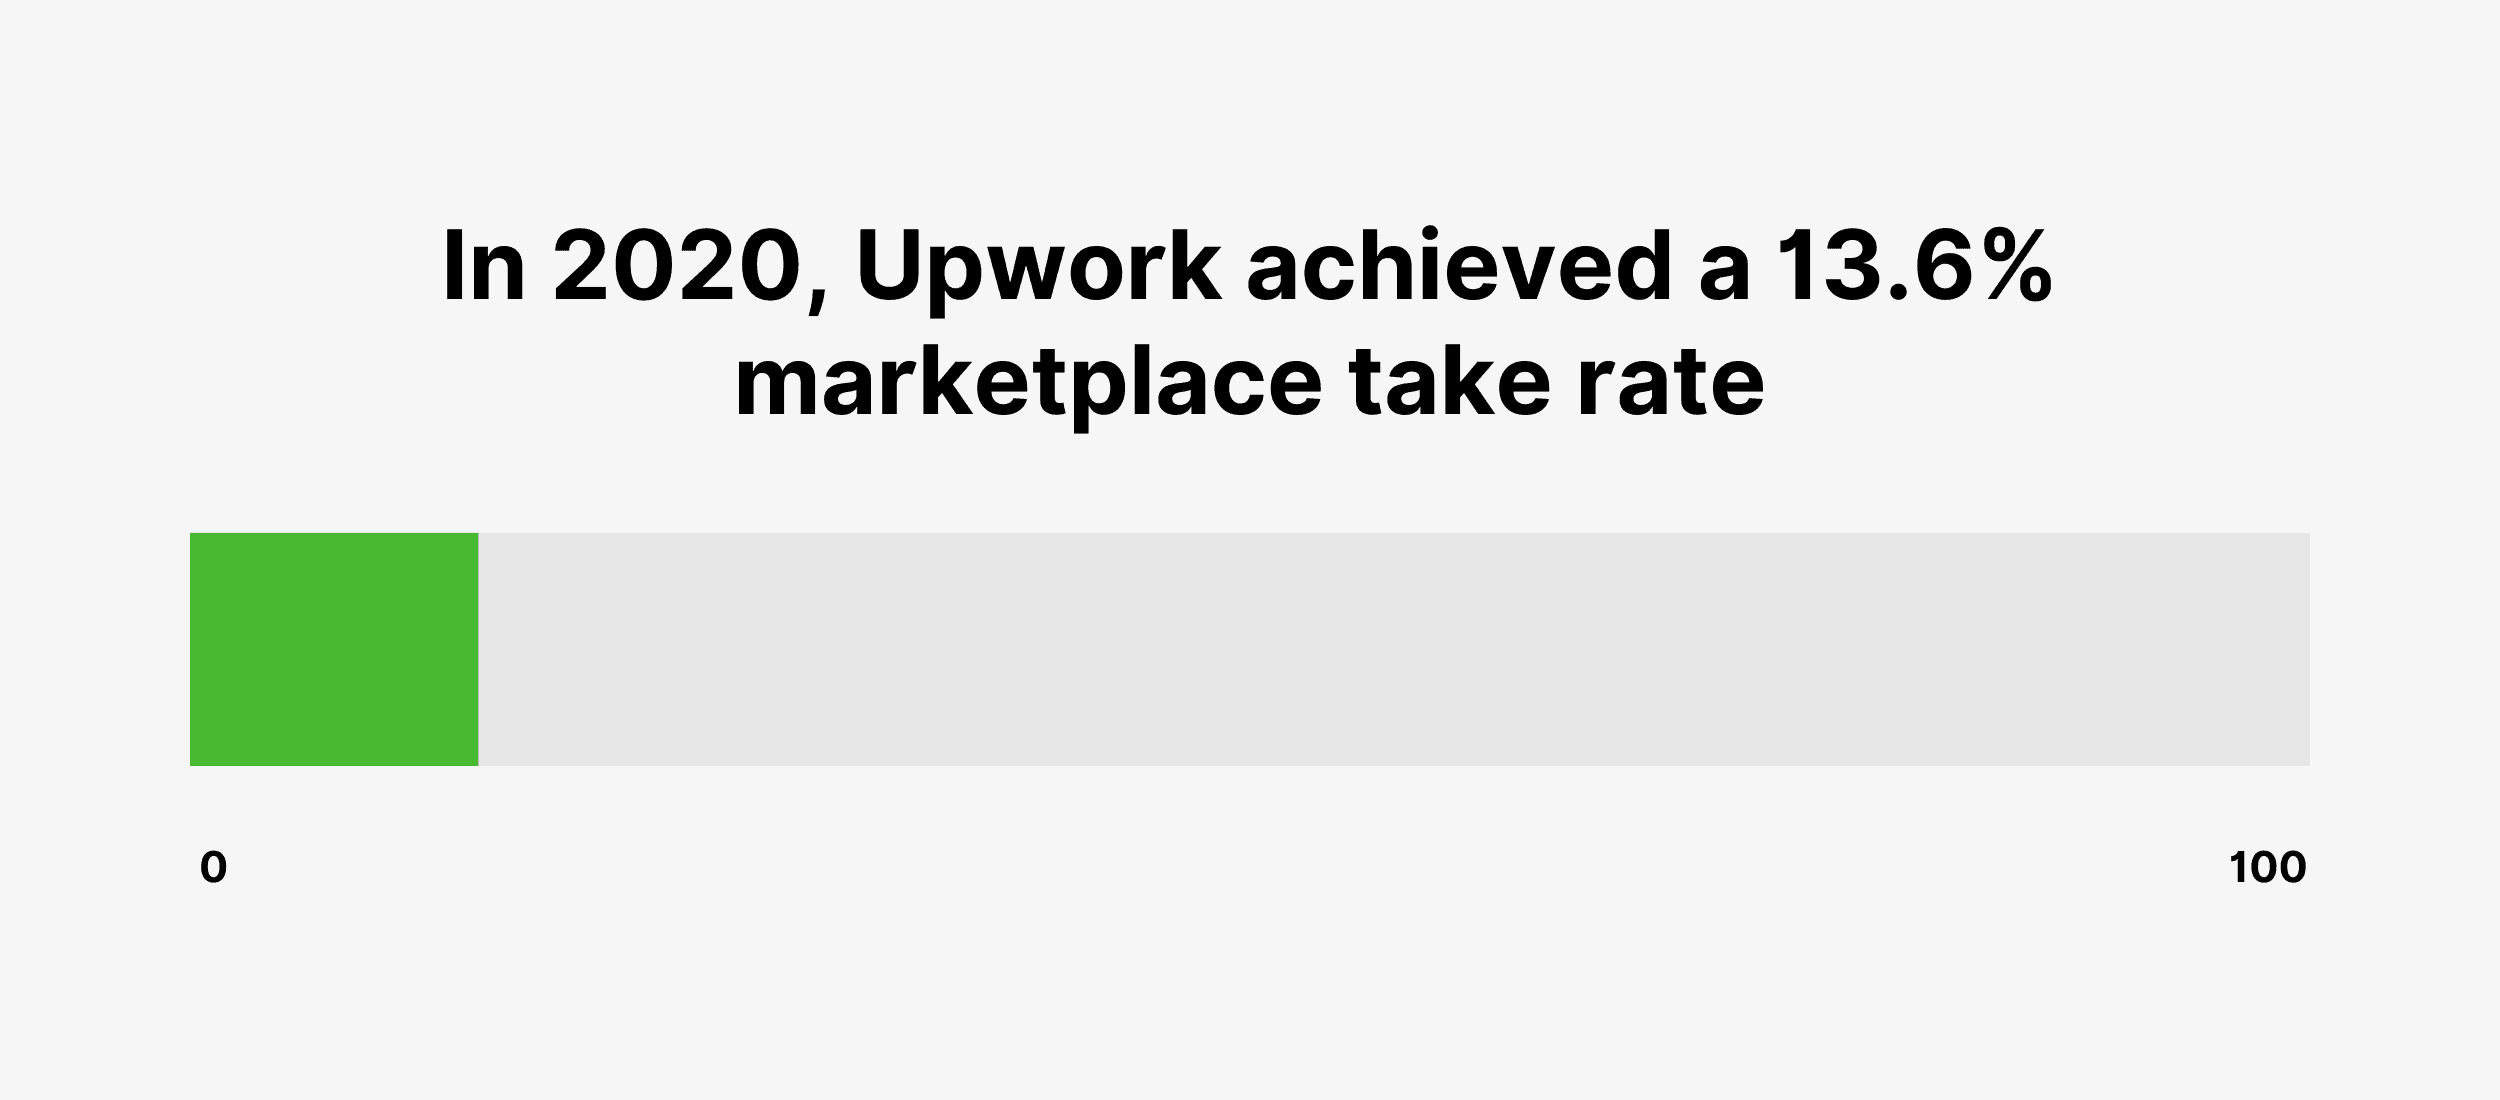 In 2020, Upwork achieved a 13.6% marketplace take rate